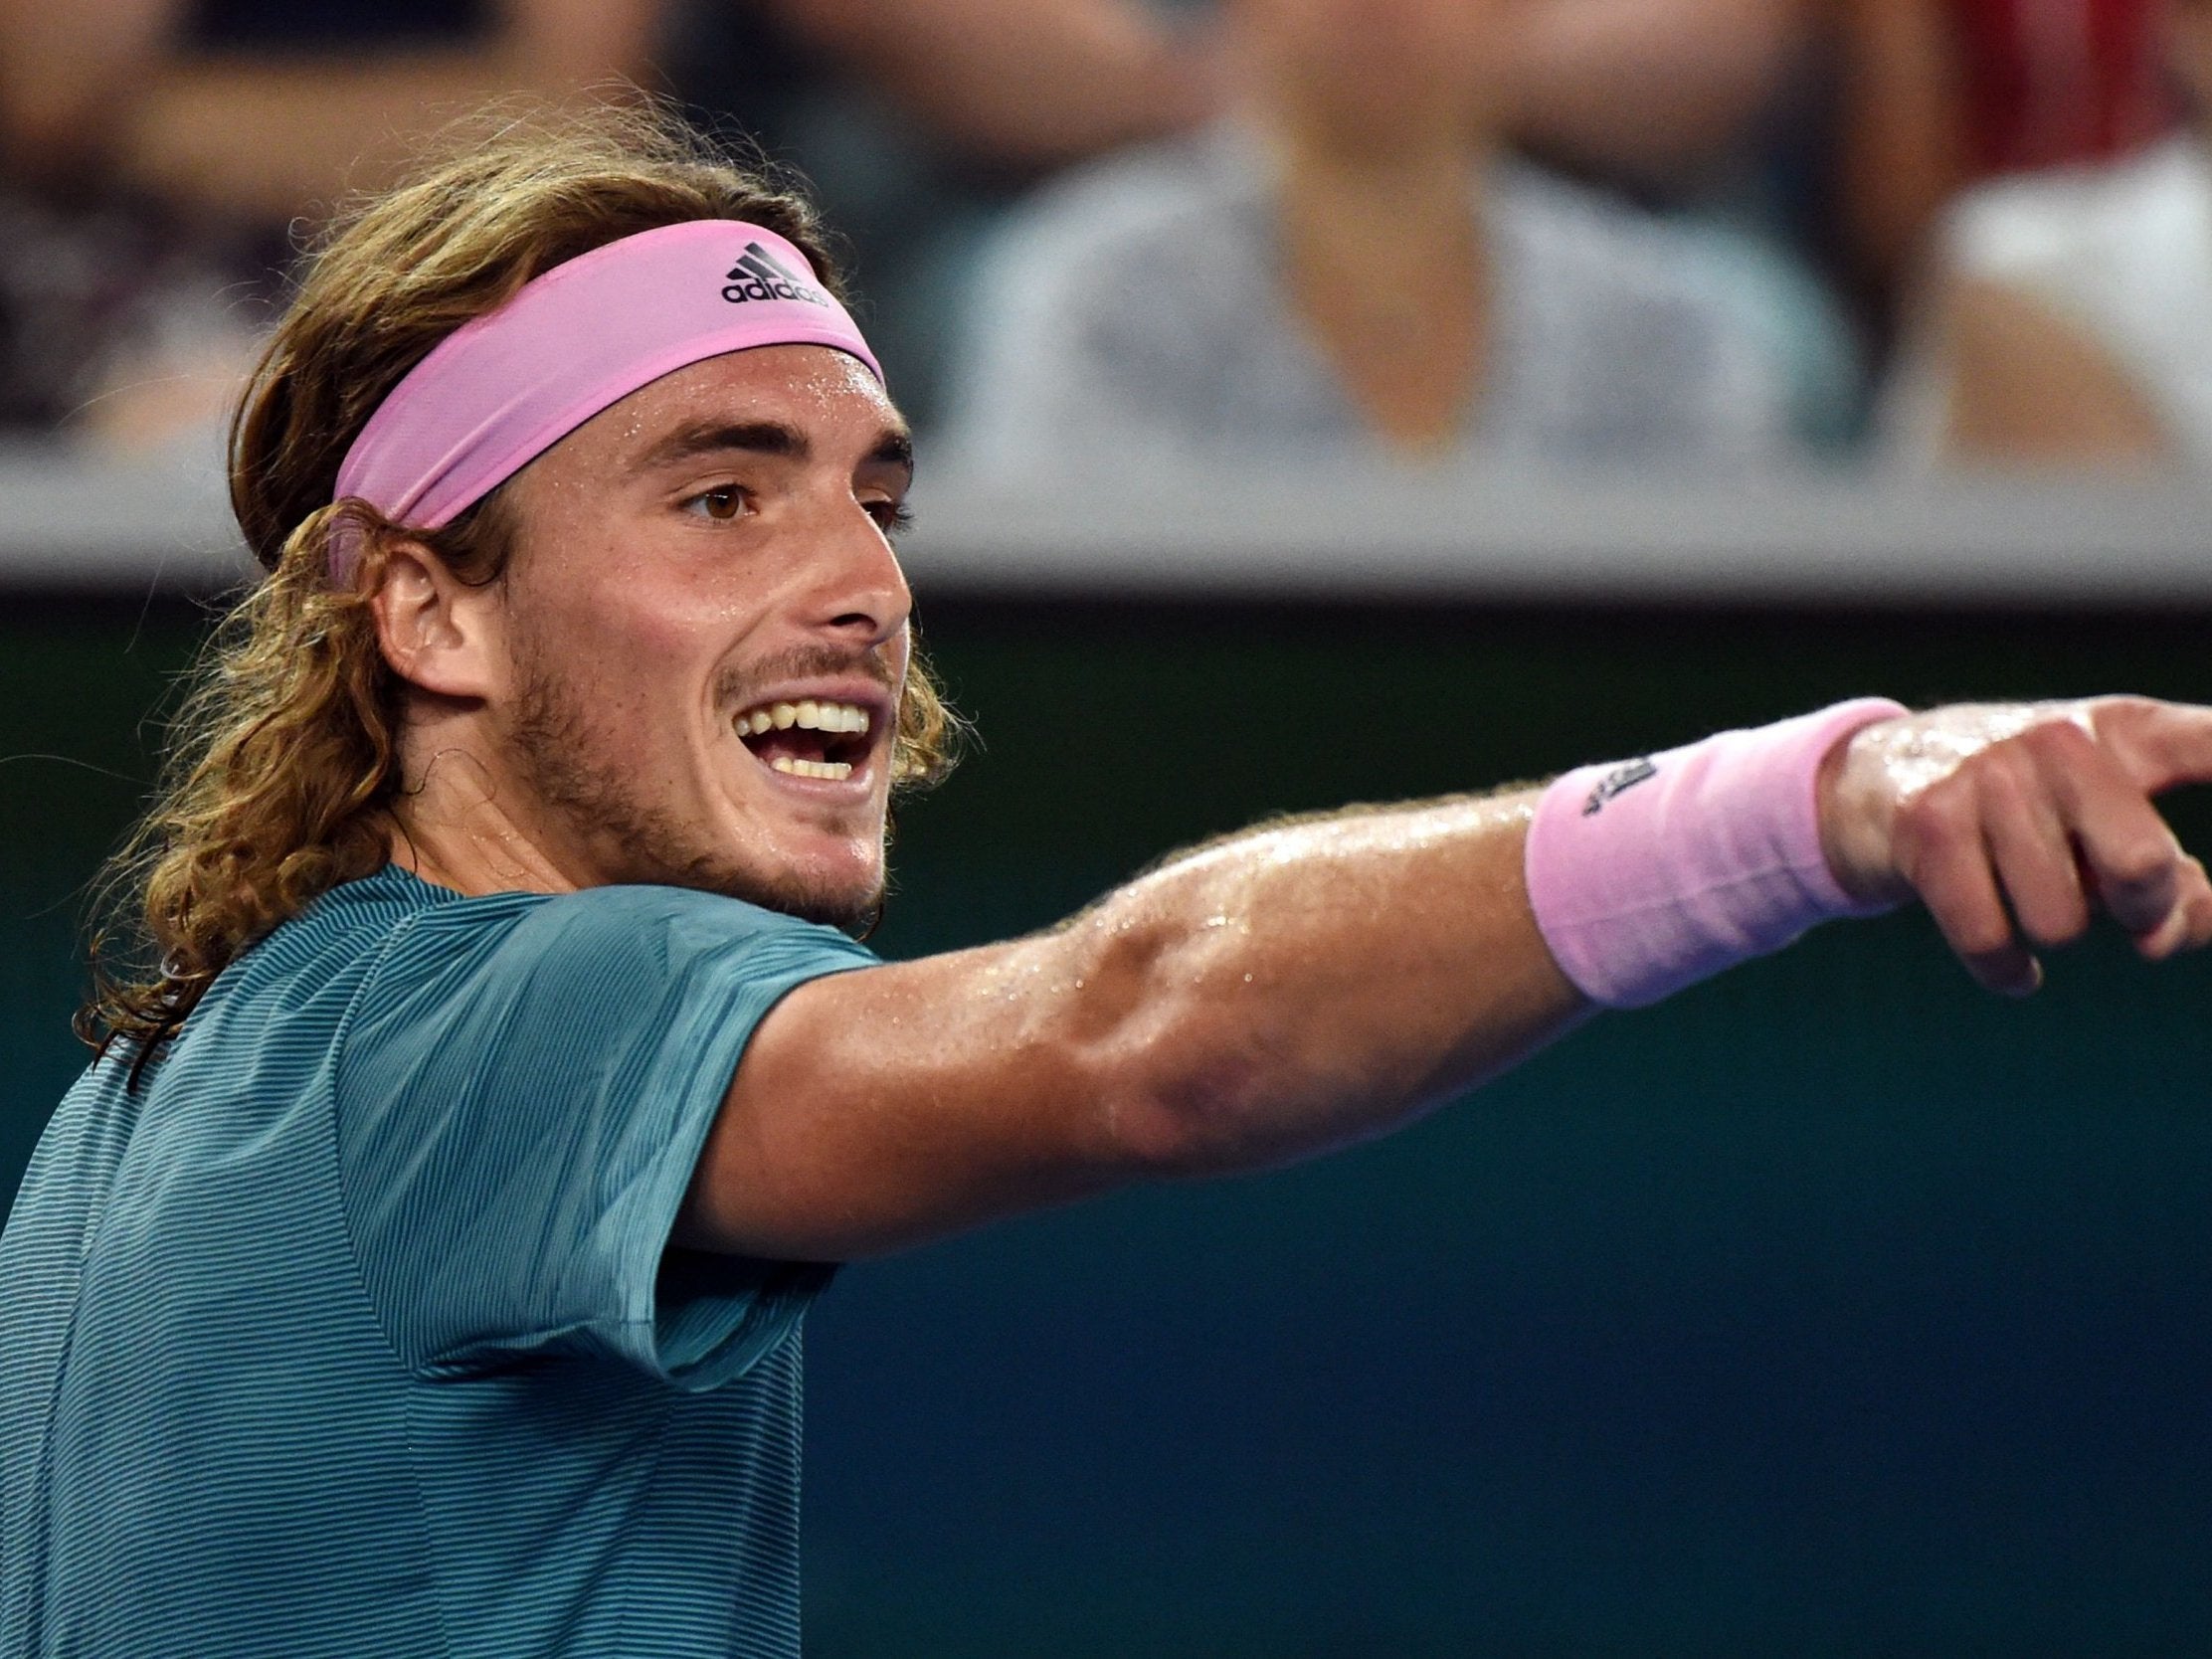 Tsitsipas has apologised for his actions